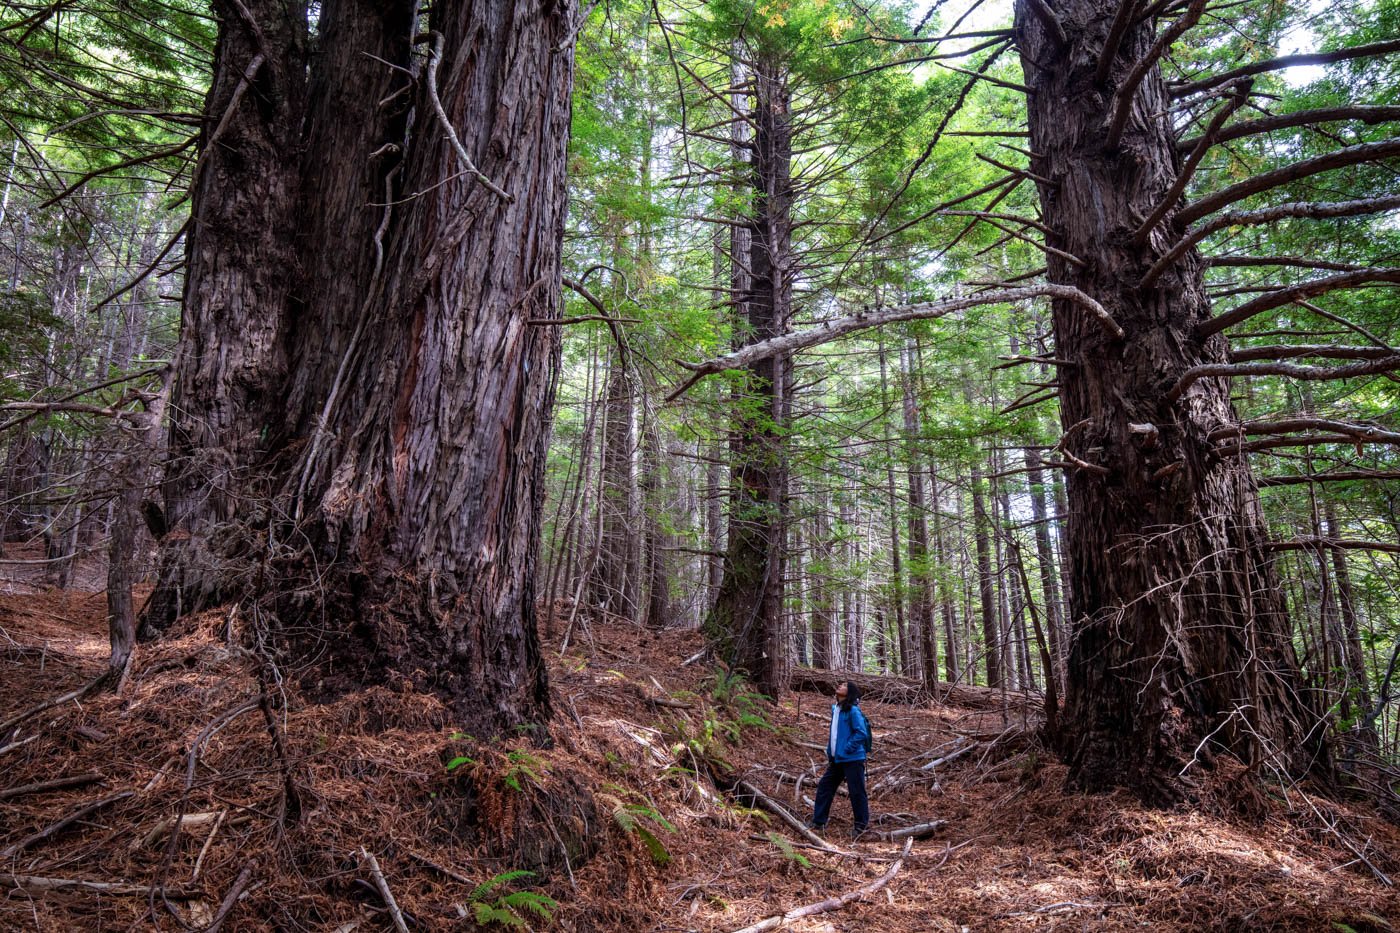 A POC woman with straight, dark, mid-length hair, wearing a blue jacket and dark pants, standing between two giant redwood trees looking up at the canopy with hand in her pocket.